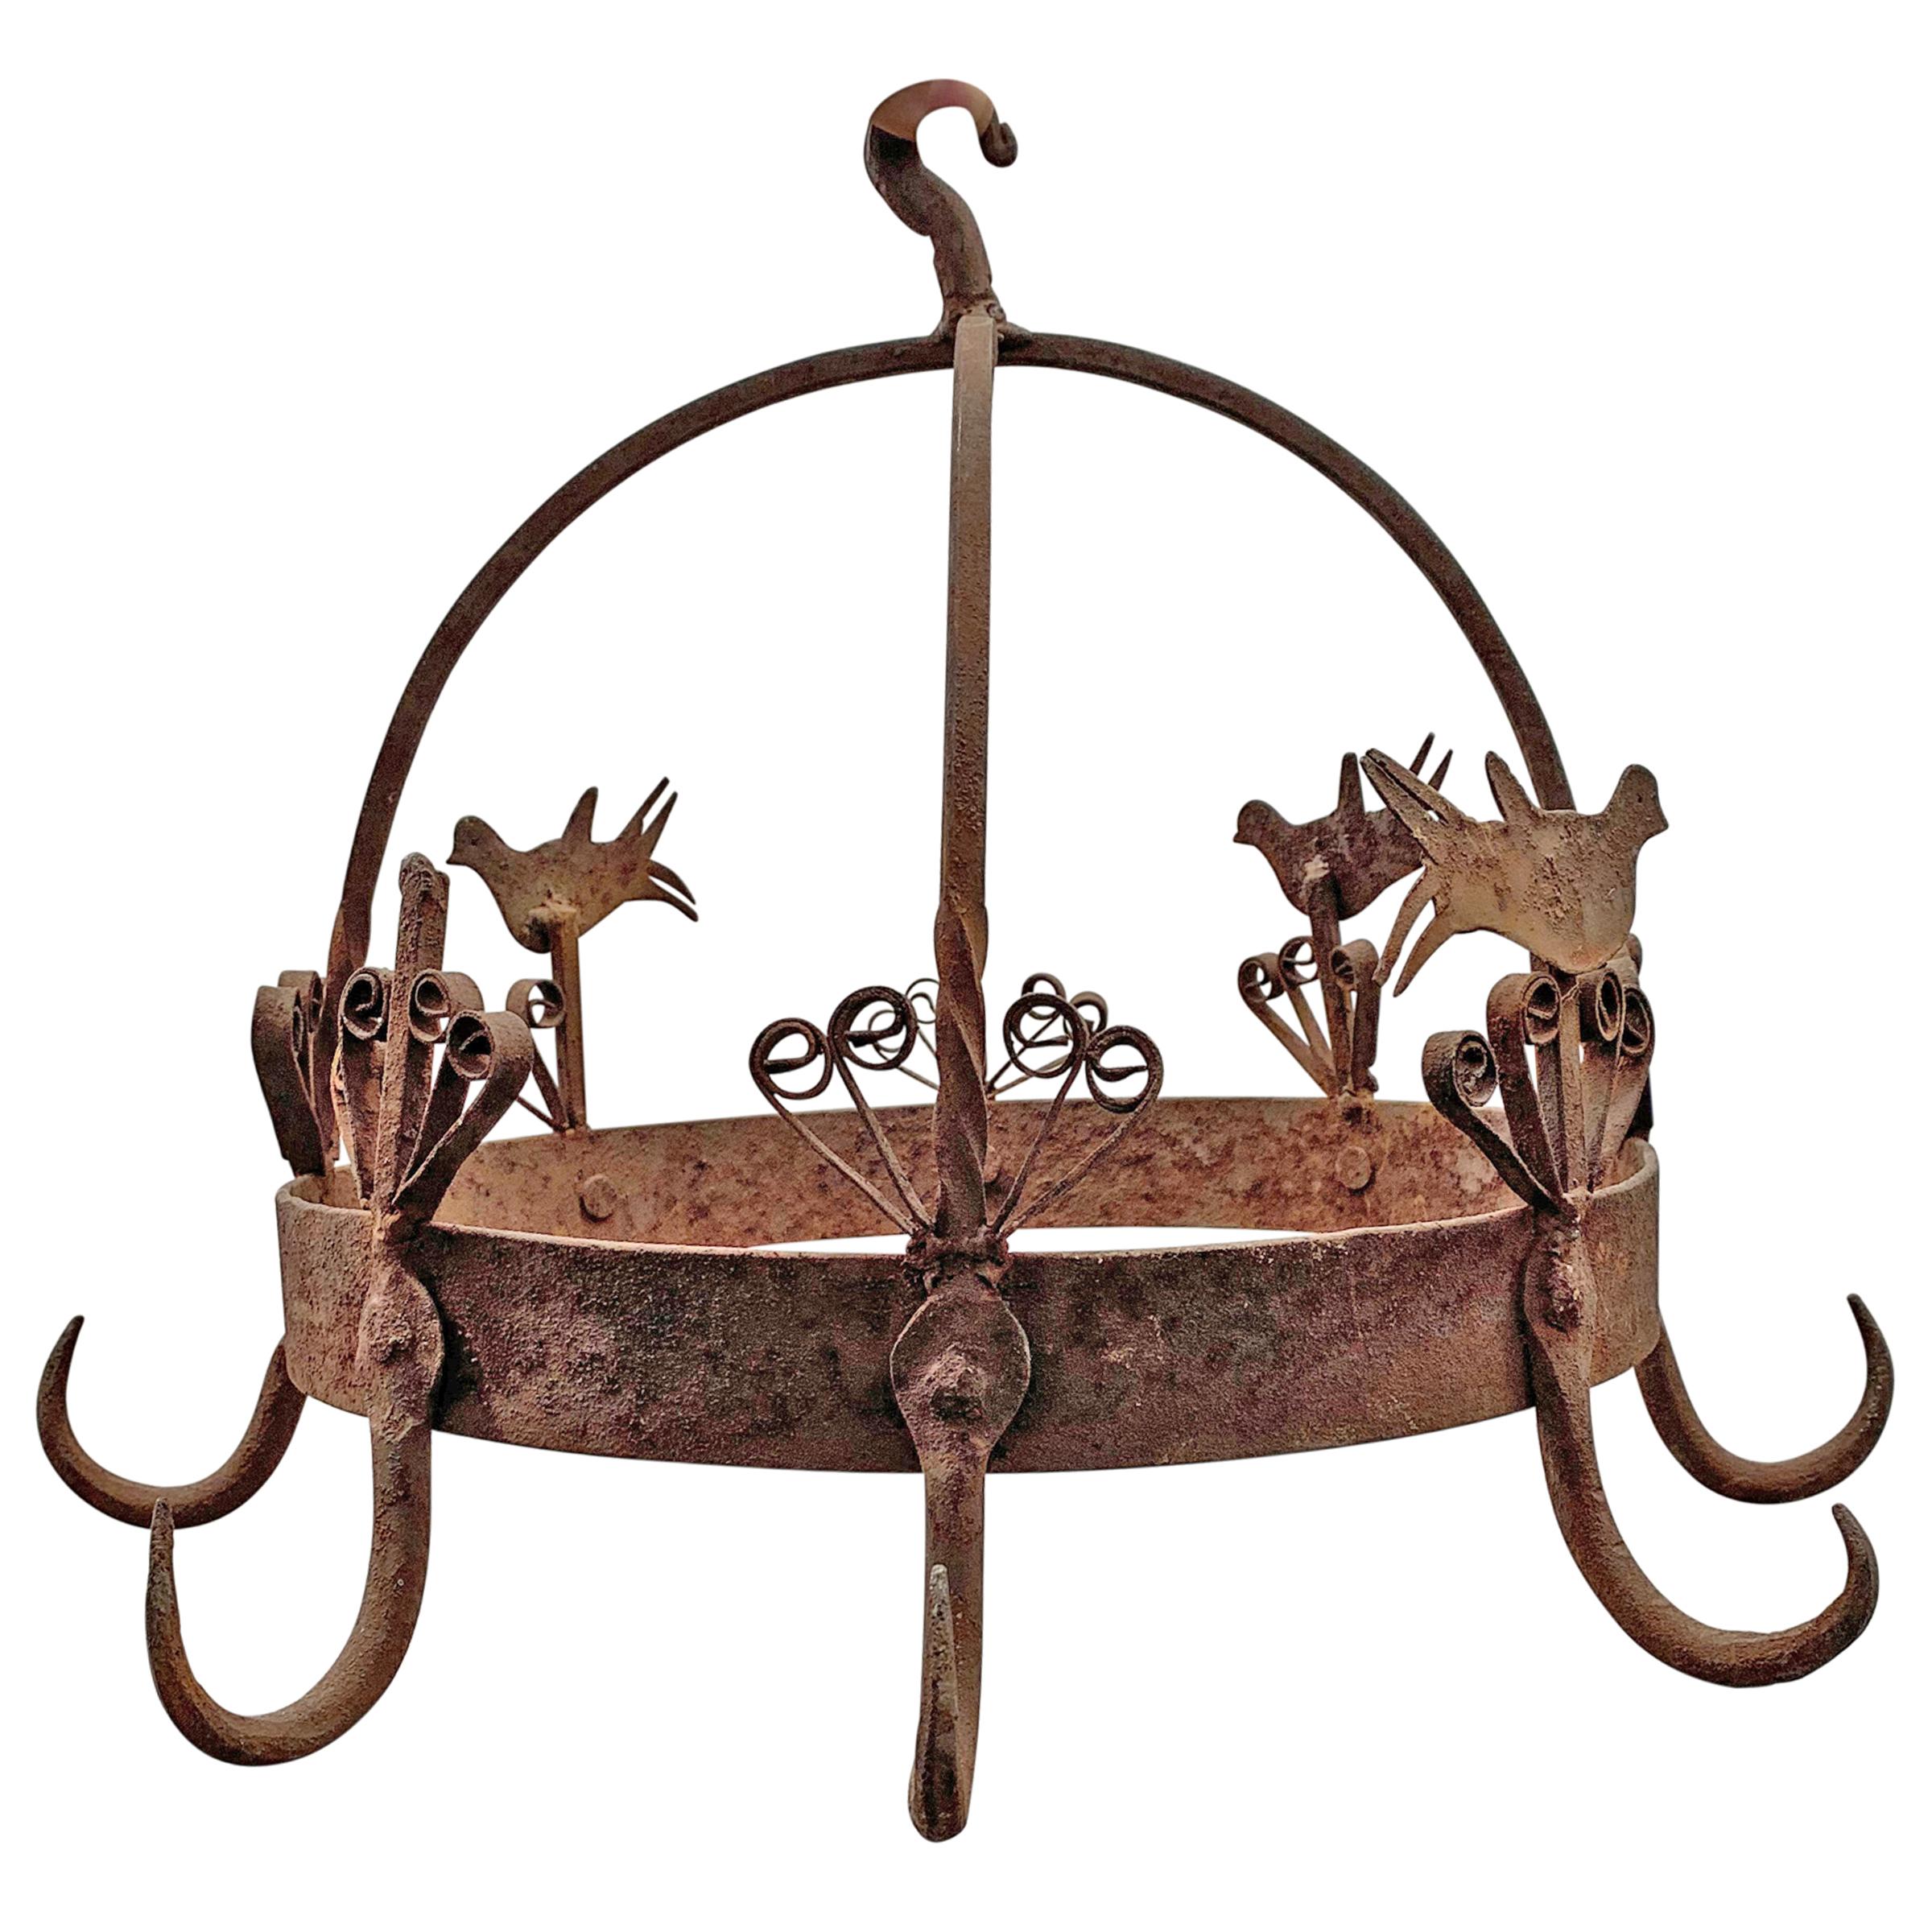 19th century English wrought iron game rack called a Dutch Crown with birds and stylized flowers surrounding the crown. Perfect for hanging herbs and flowers to dry.